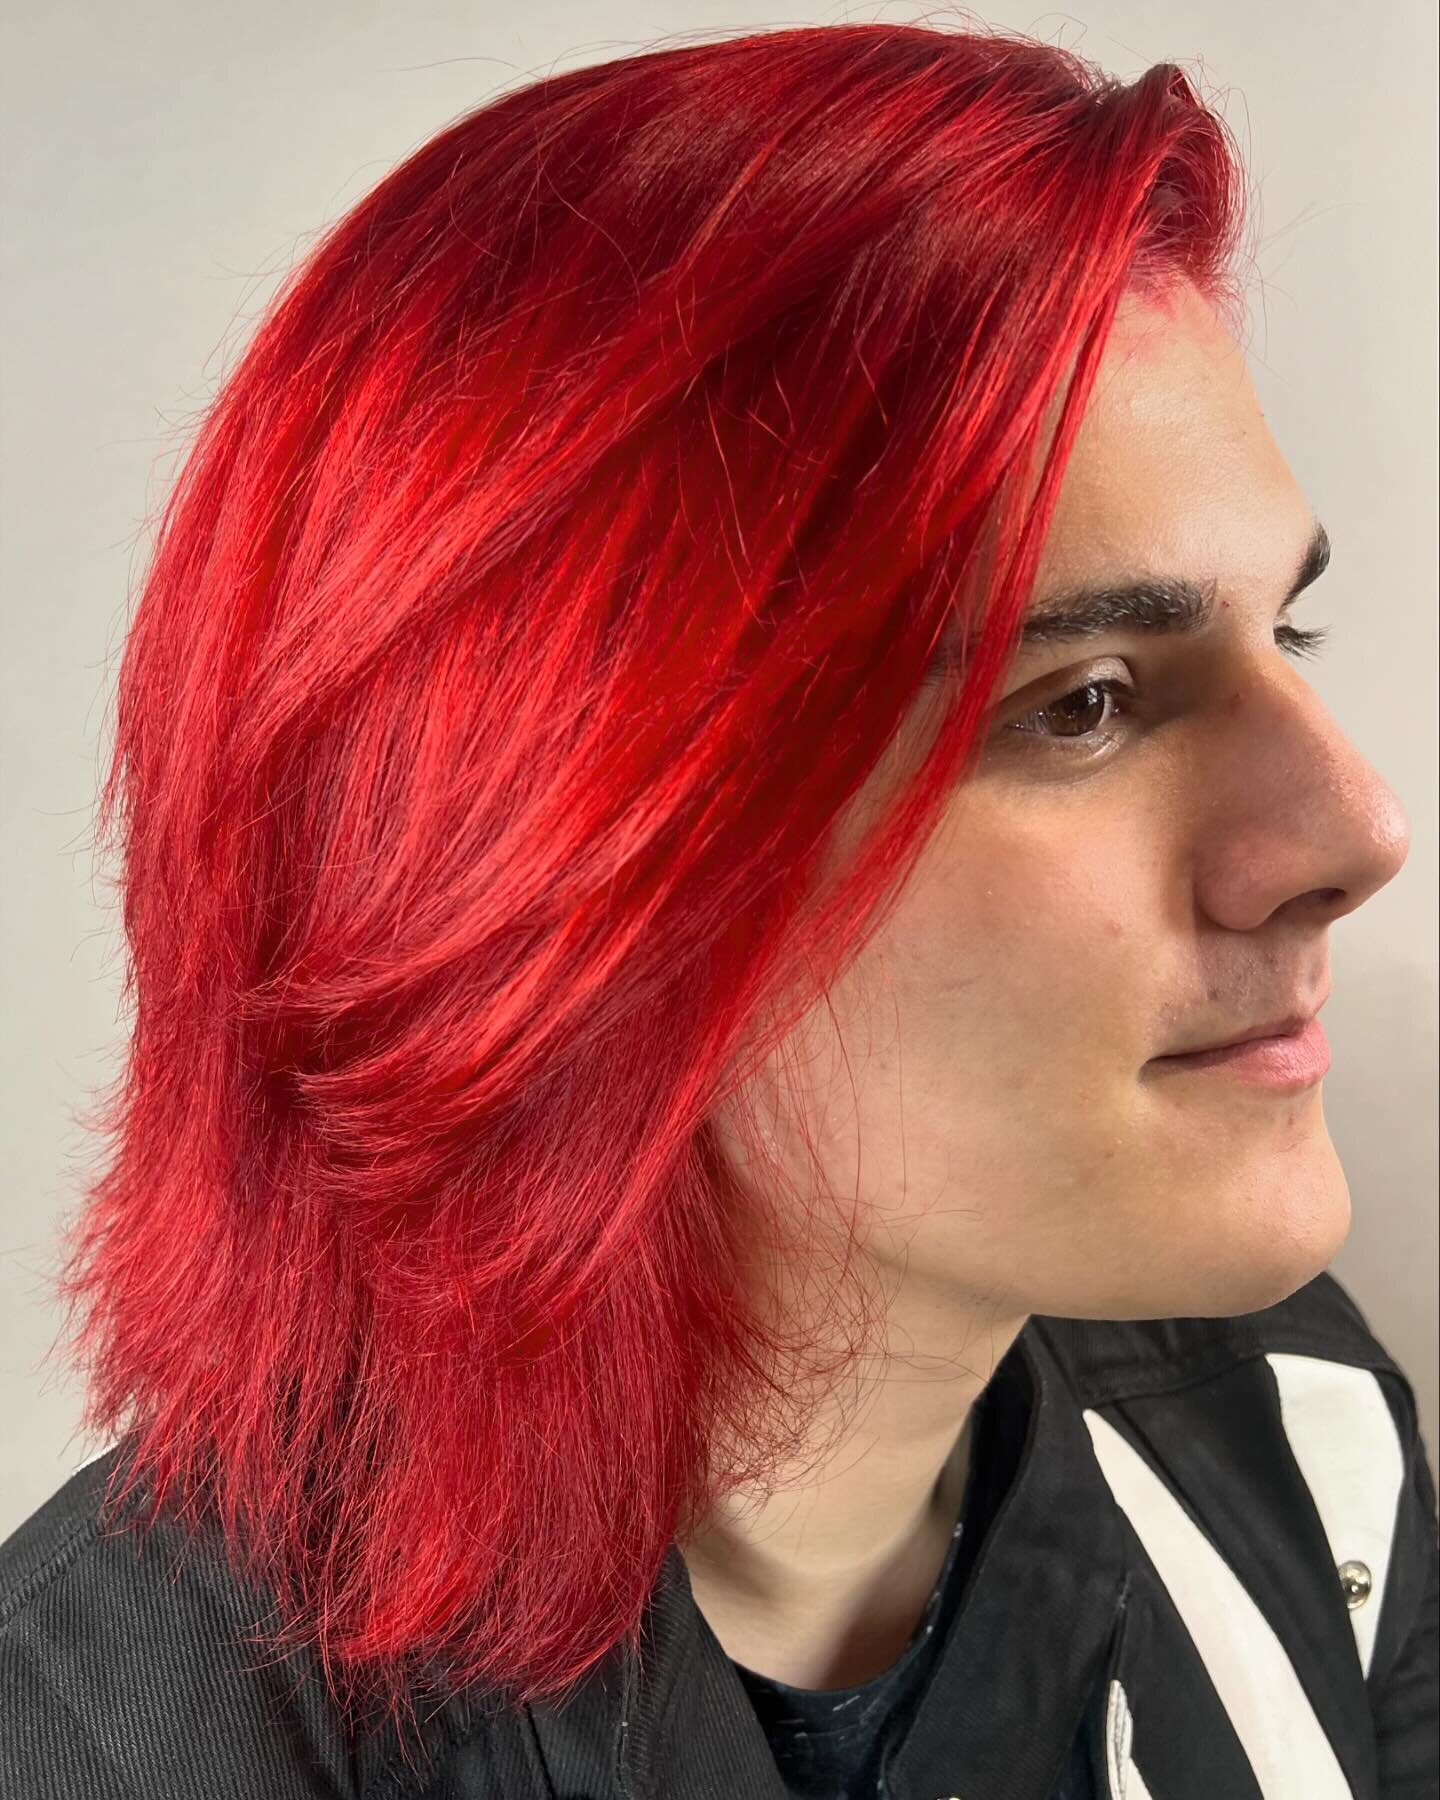 This client was ready to take the plunge and go for an all over vivid red color! I love when clients are looking for a big change, and vivid colors like these are so fun 😍

#baltimorehairstylist #linthicumhairstylist #vividsalonlinthicum #wemakeitvi